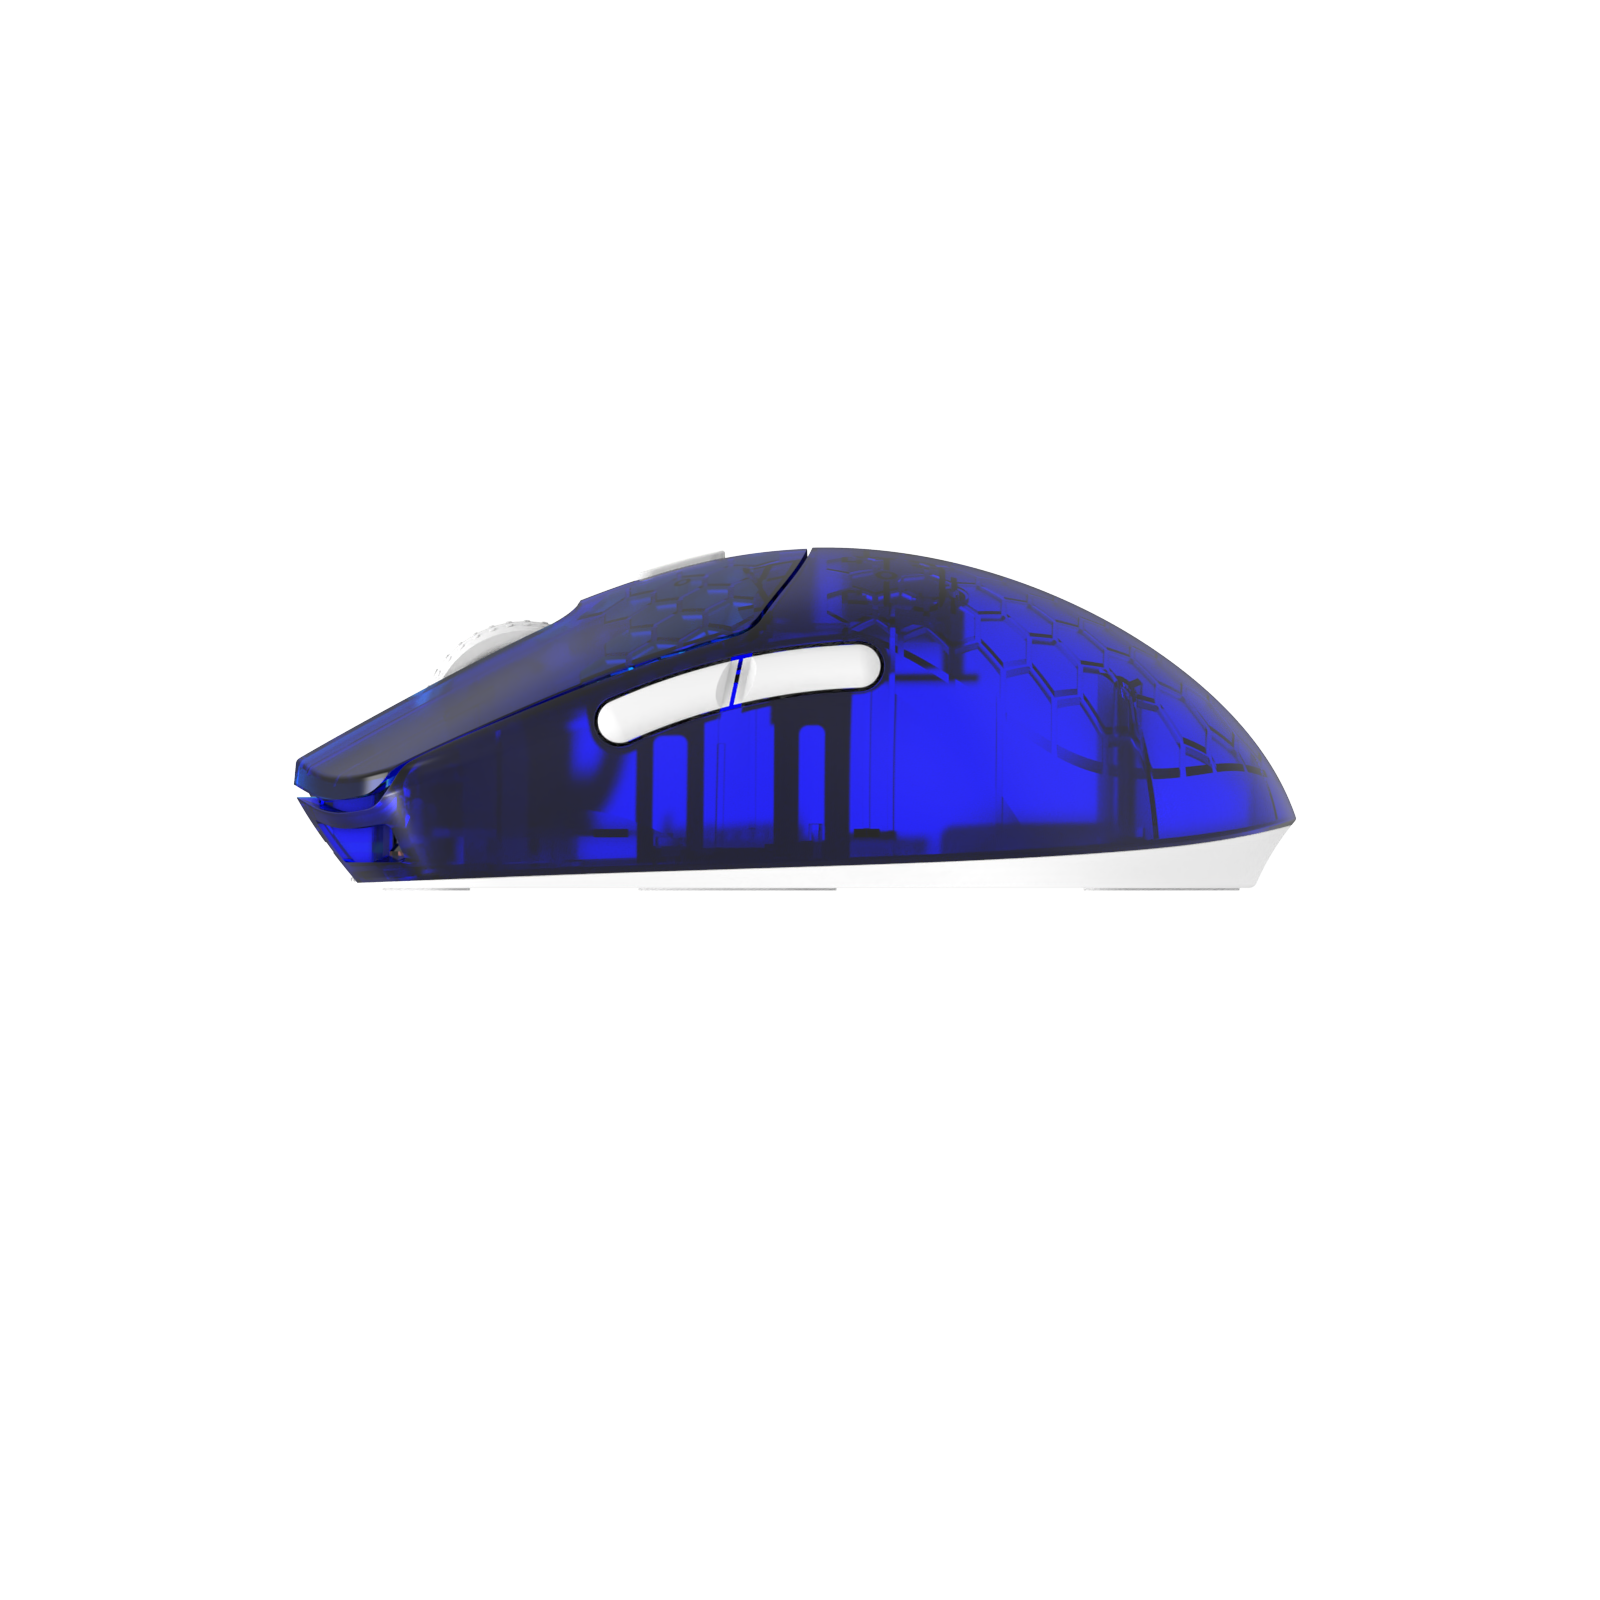 HTS Plus ( HTS+ ) 4K Wireless Gaming Mouse,USB: Type C port